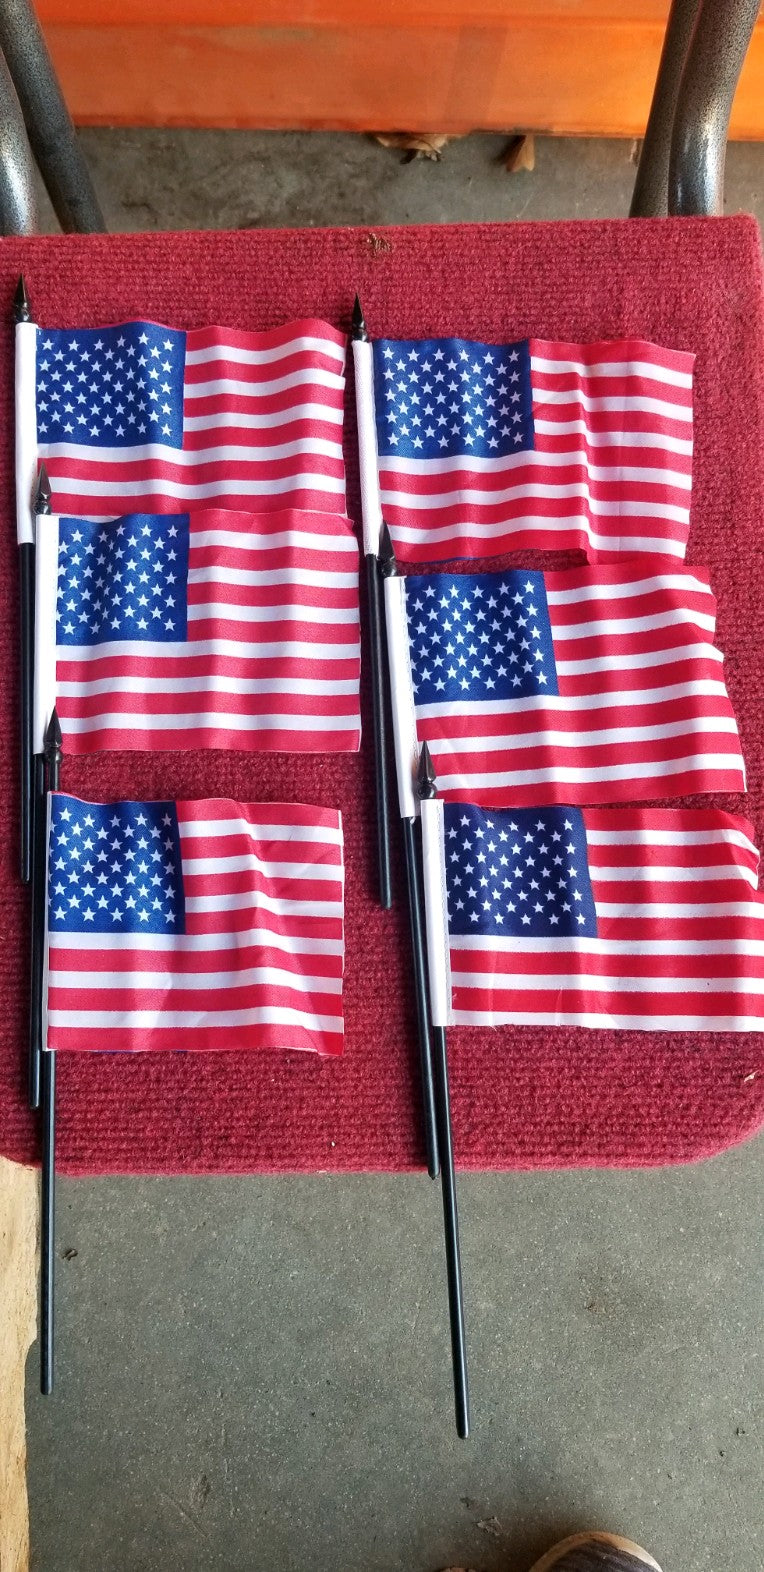 USA 4x6 inches Stick Flags Dura-Lite ™ Poly Printed American Flags